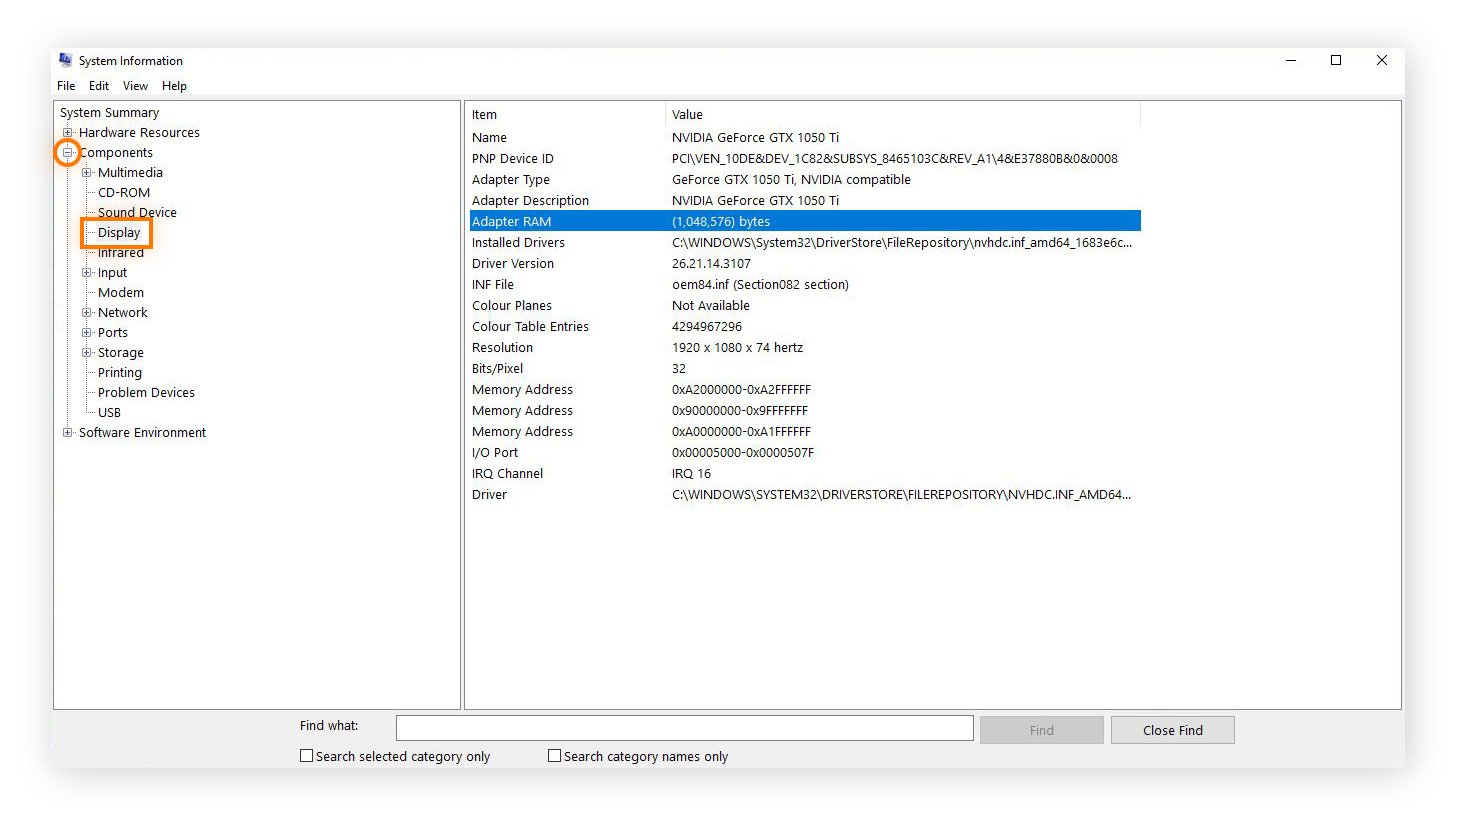 Full details of my graphics card listed within the Display summary of Windows System Information.